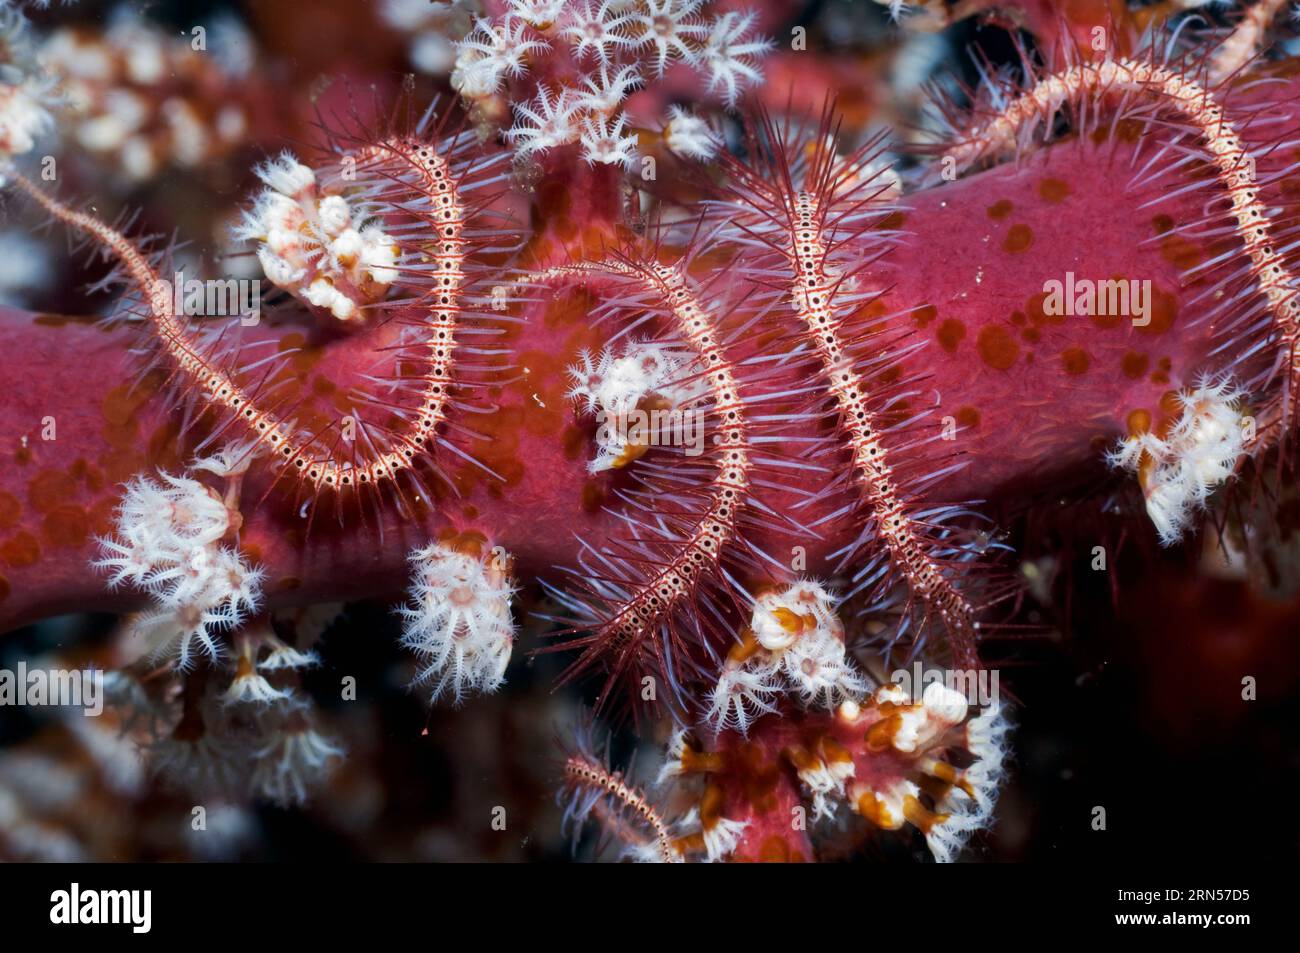 Brittlestar (Ophiothrix species) on soft coral on which there are Acoel flatworms (Waminoa species).  Rinca, Komodo National Park, Indonesia. Stock Photo